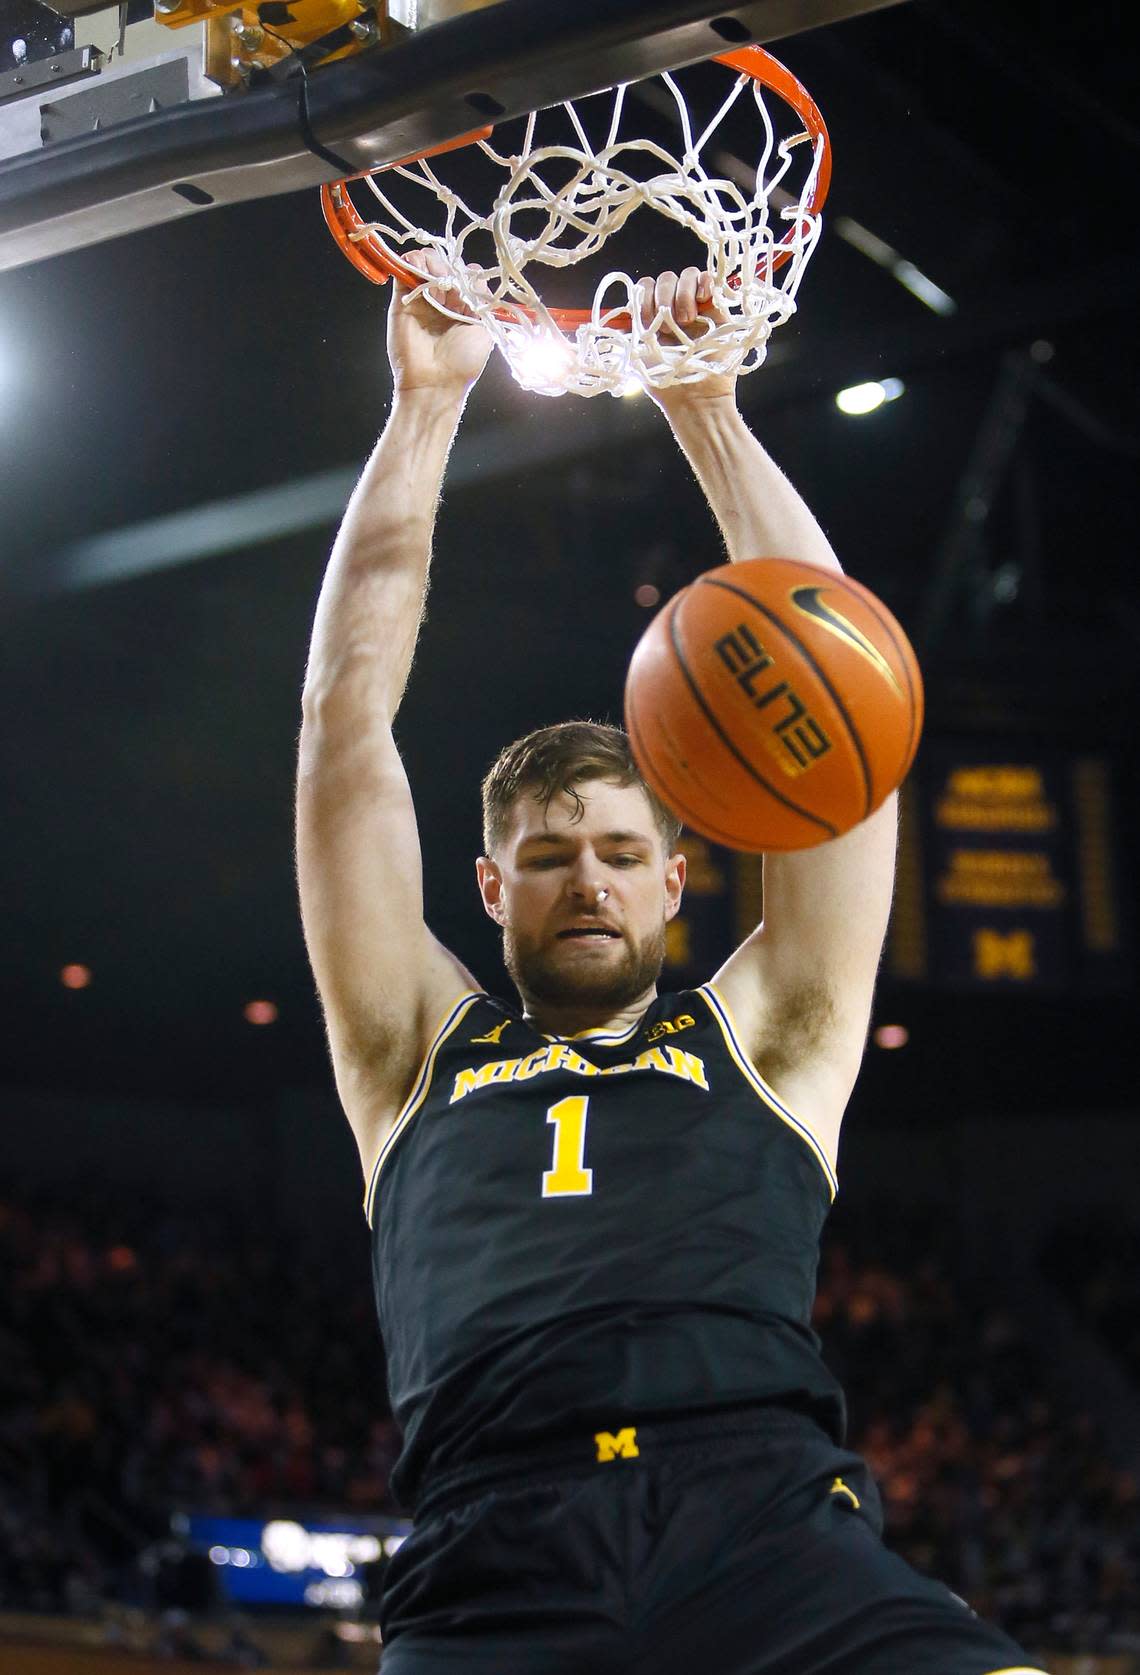 Michigan center Hunter Dickinson averaged 18.6 points and posted 29 double-doubles last season. He’ll do battle with Kentucky’s Oscar Tshiebwe on Dec. 4 when the teams meet in London.